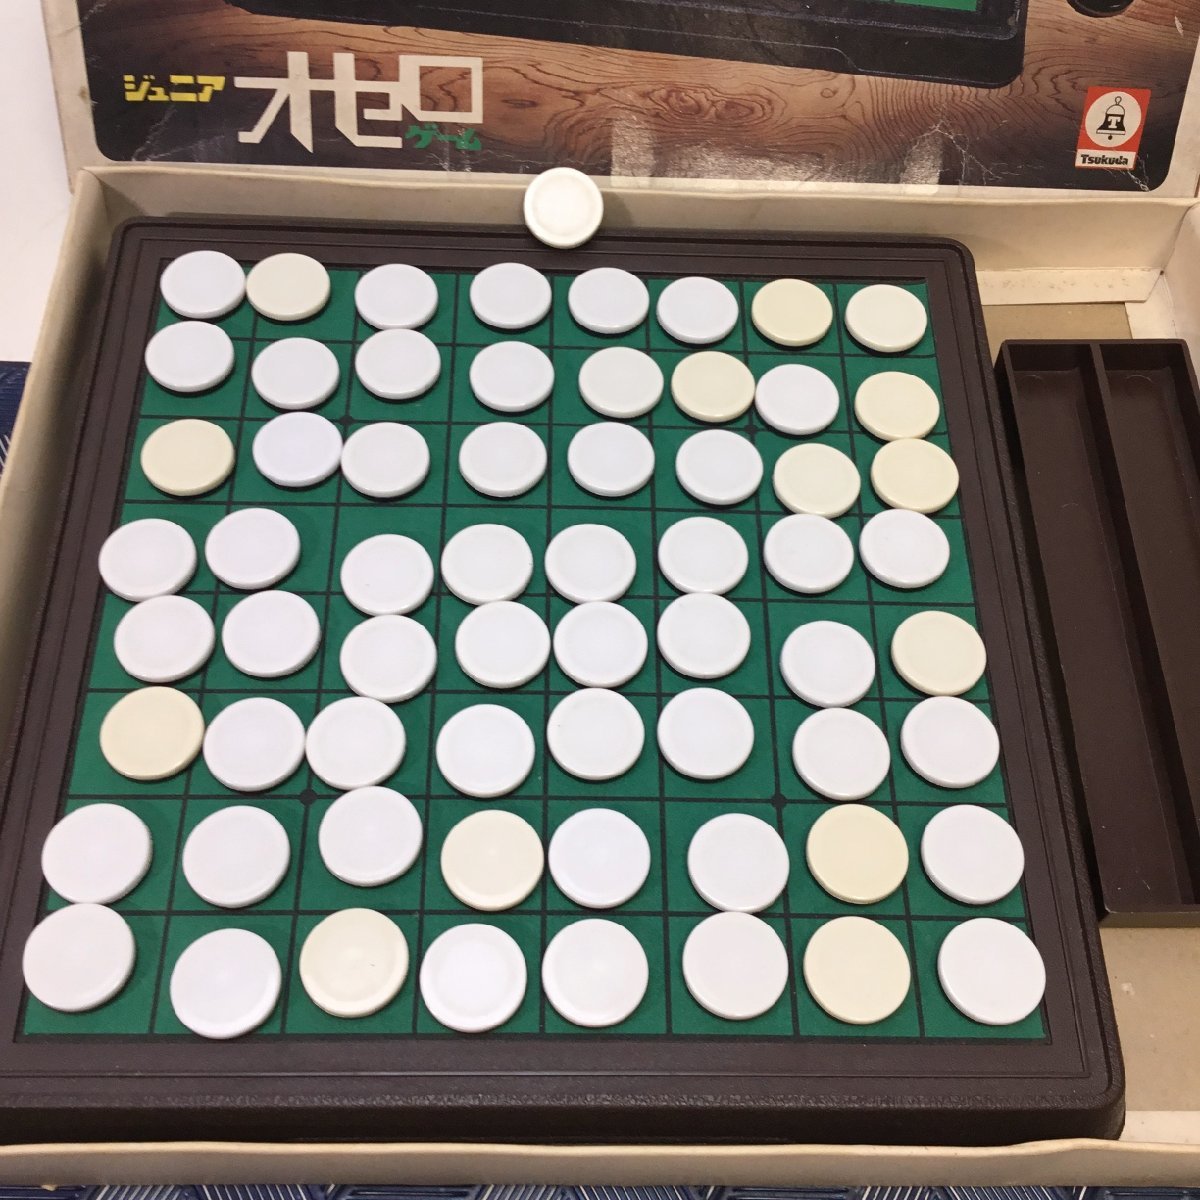 [ secondhand goods / in voice registration shop /CH] the first period about version tsukda Othello board game valuable premium RS0302/0000